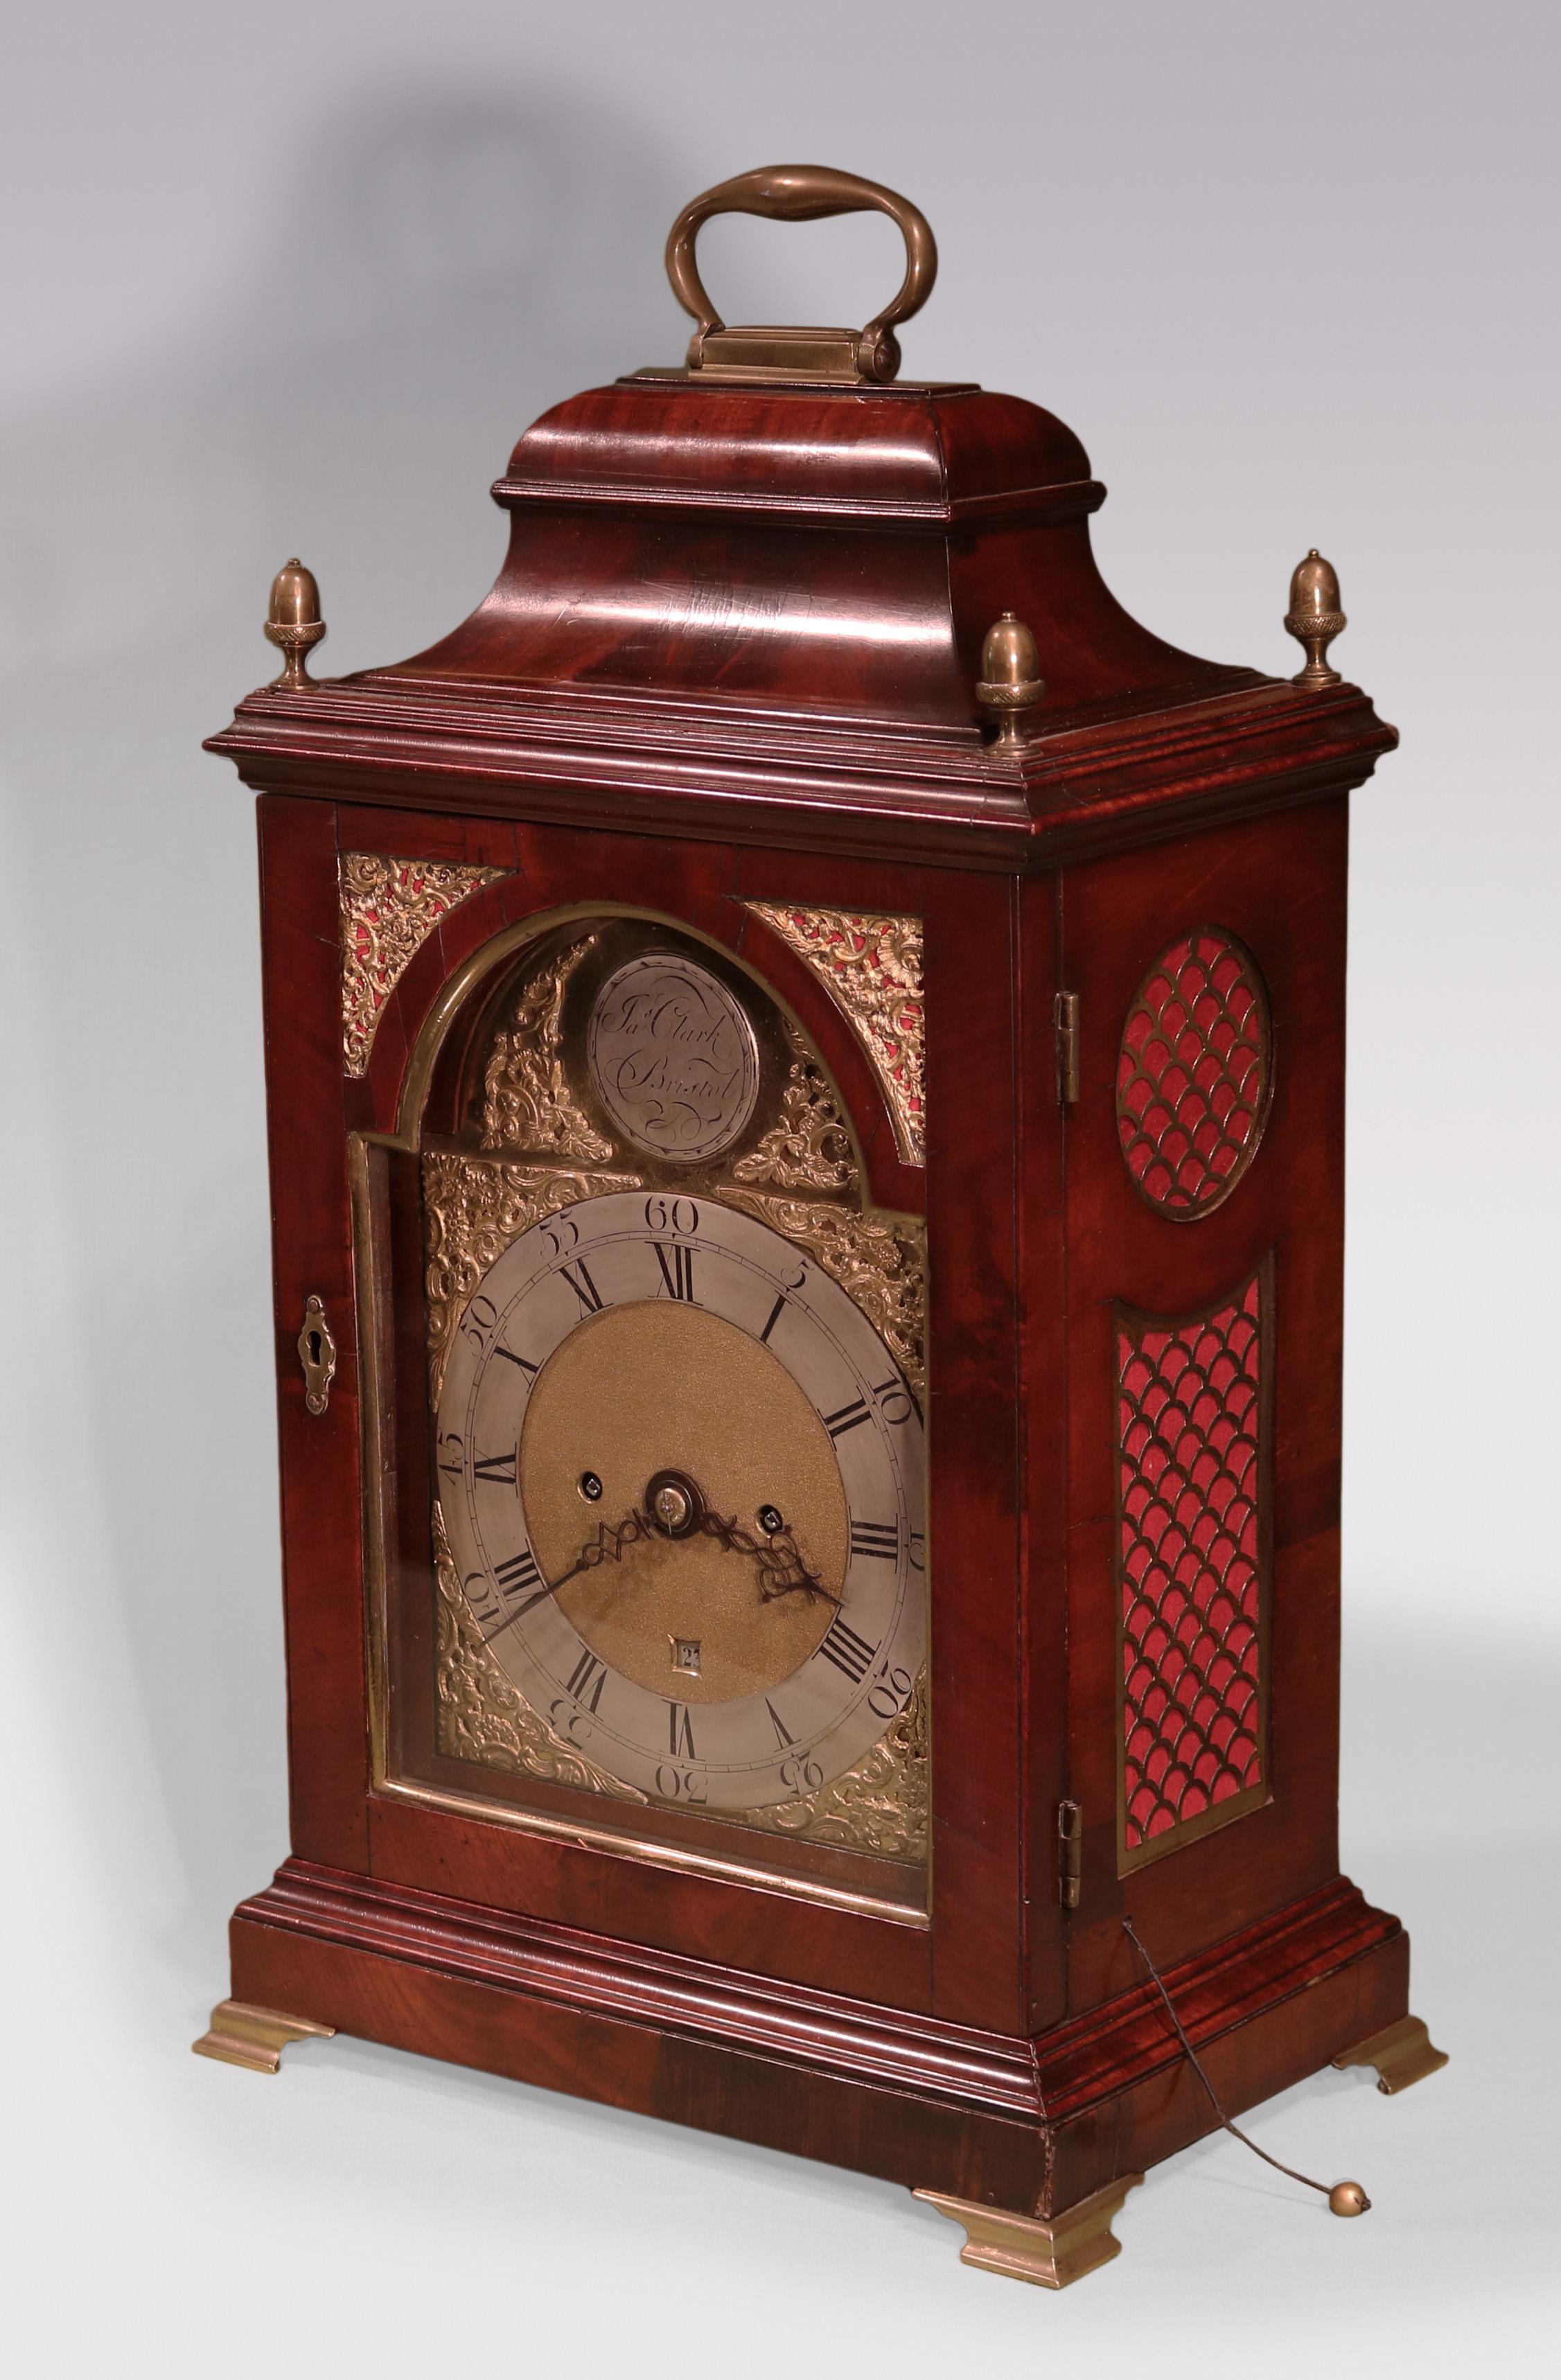 A late 18th Century mahogany Bracket Clock by “Ja's Clark Bristol” with silver dial and gilt brass spandrels, having twin chain fusee movement with verge escapement, contained in bell shaped top surmounted by brass handle & acorn finials on moulded